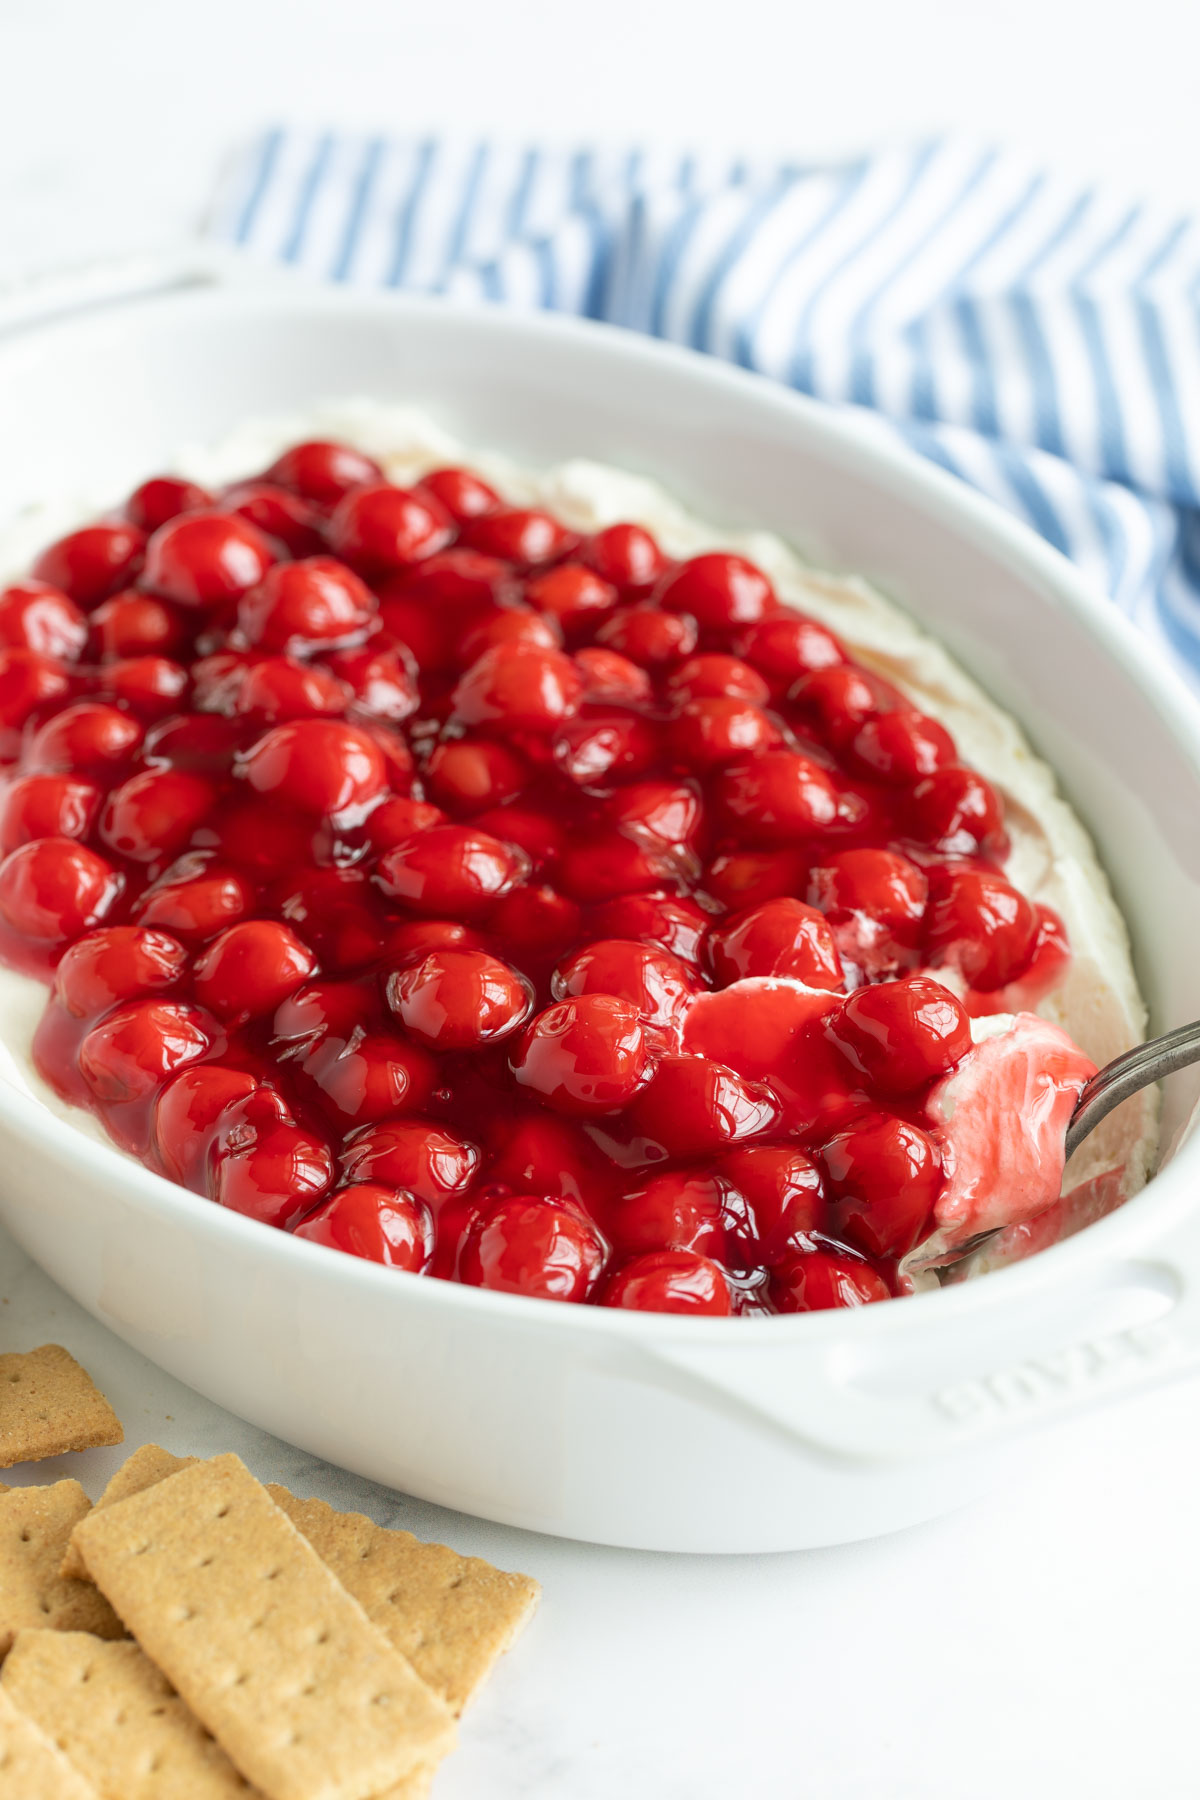 Cherry cheesecake dip in a white baking dish with a spoon.